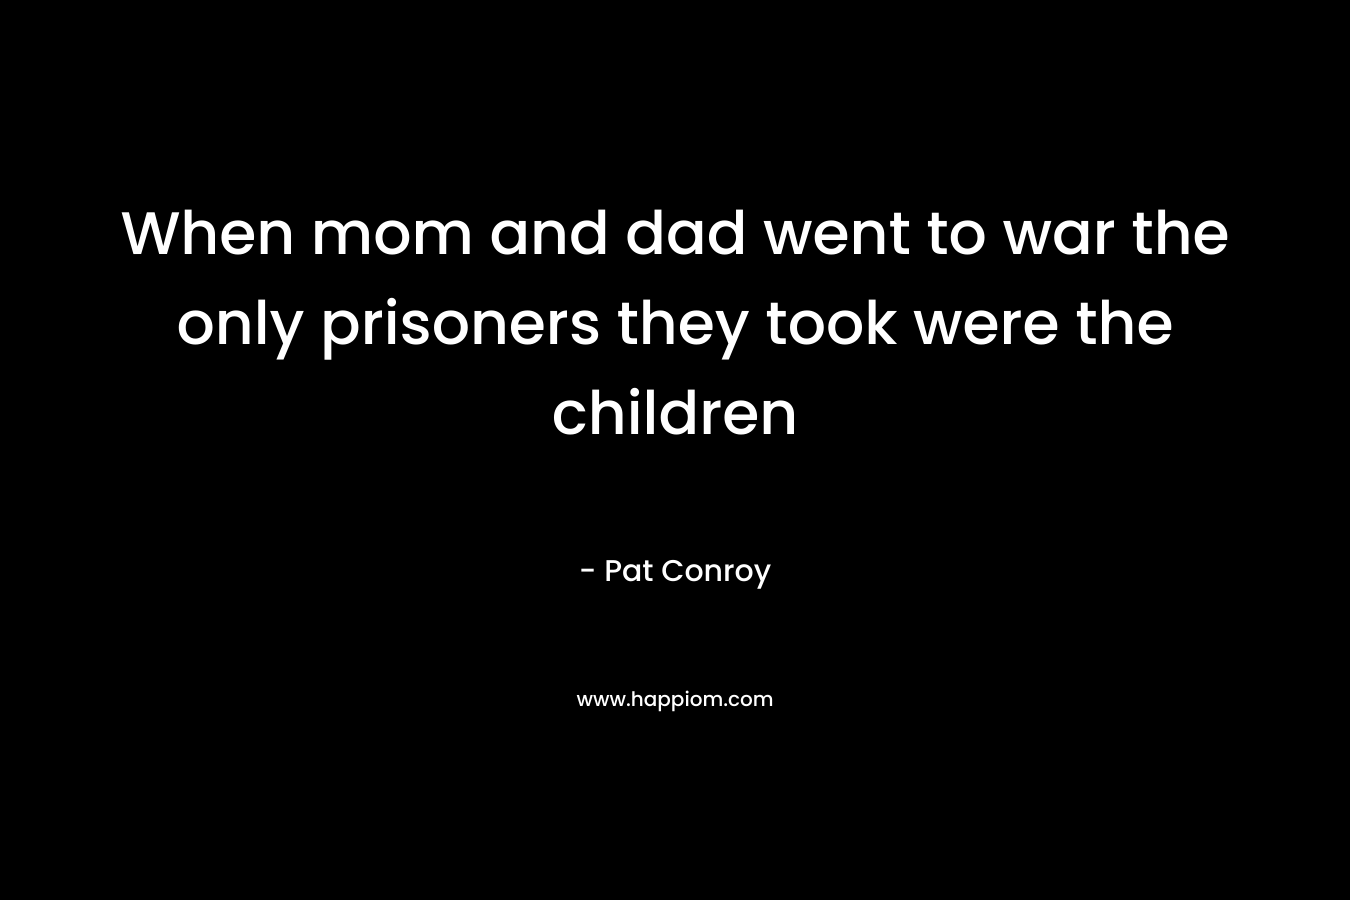 When mom and dad went to war the only prisoners they took were the children – Pat Conroy